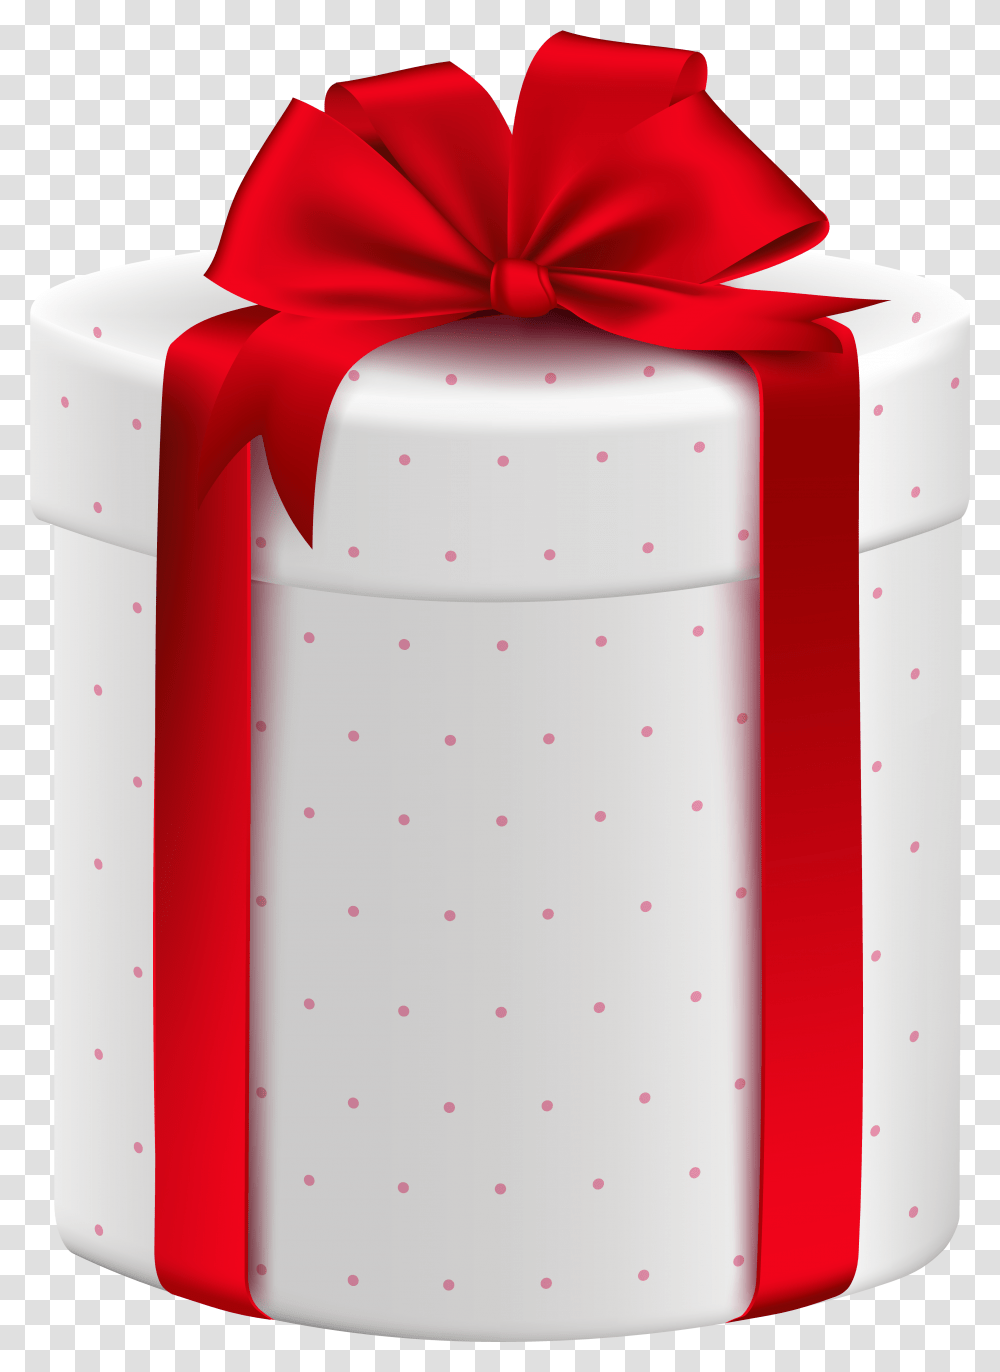 Packing Gifts, Snowman, Winter, Outdoors, Nature Transparent Png